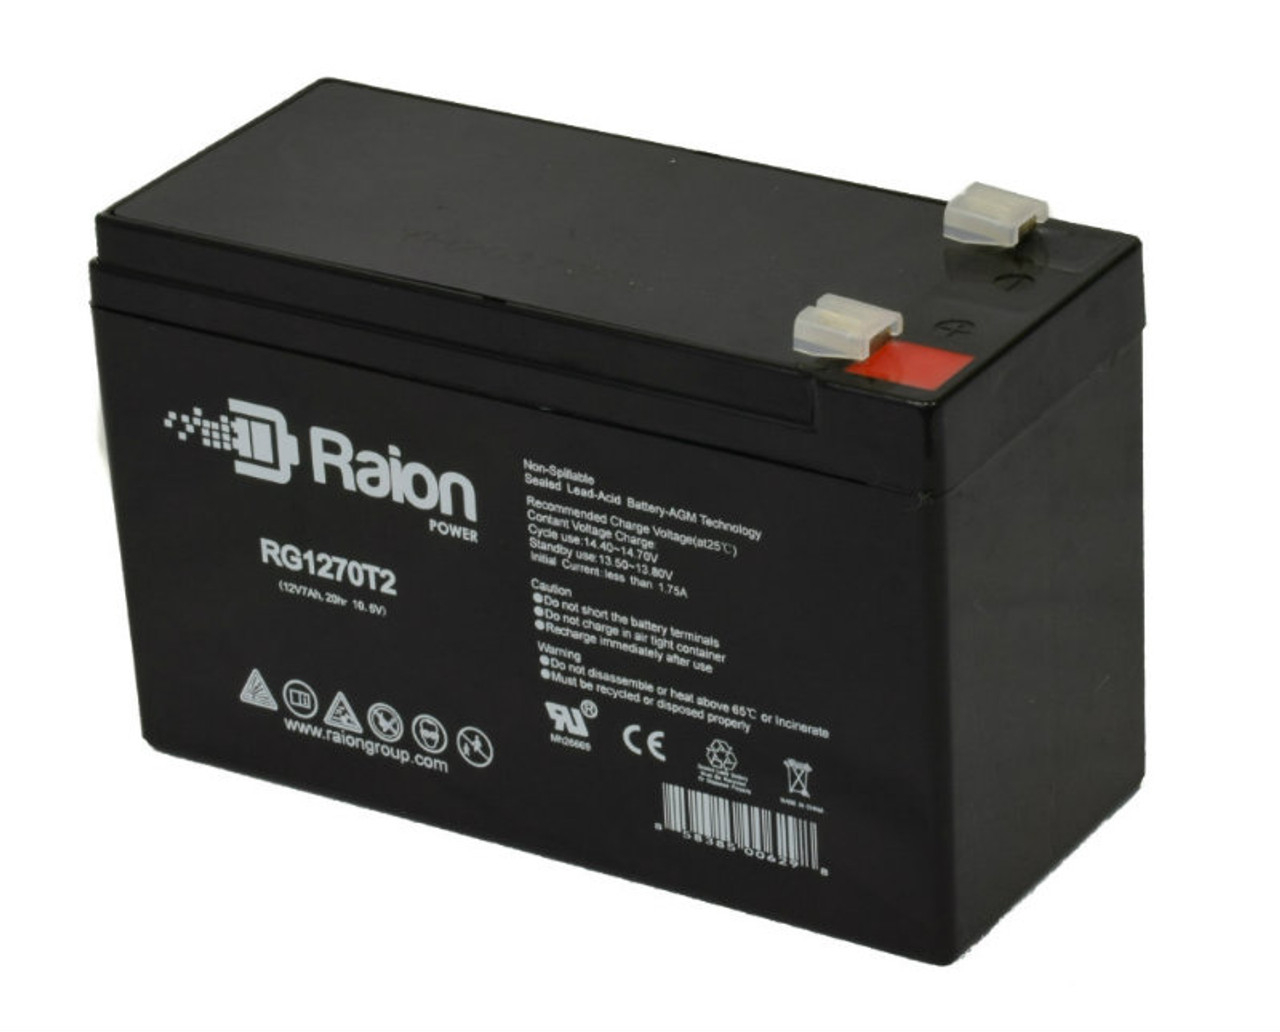 Raion Power Replacement 12V 7Ah Battery for Arrow International 7350 Cardiac Output Monitor - 1 Pack